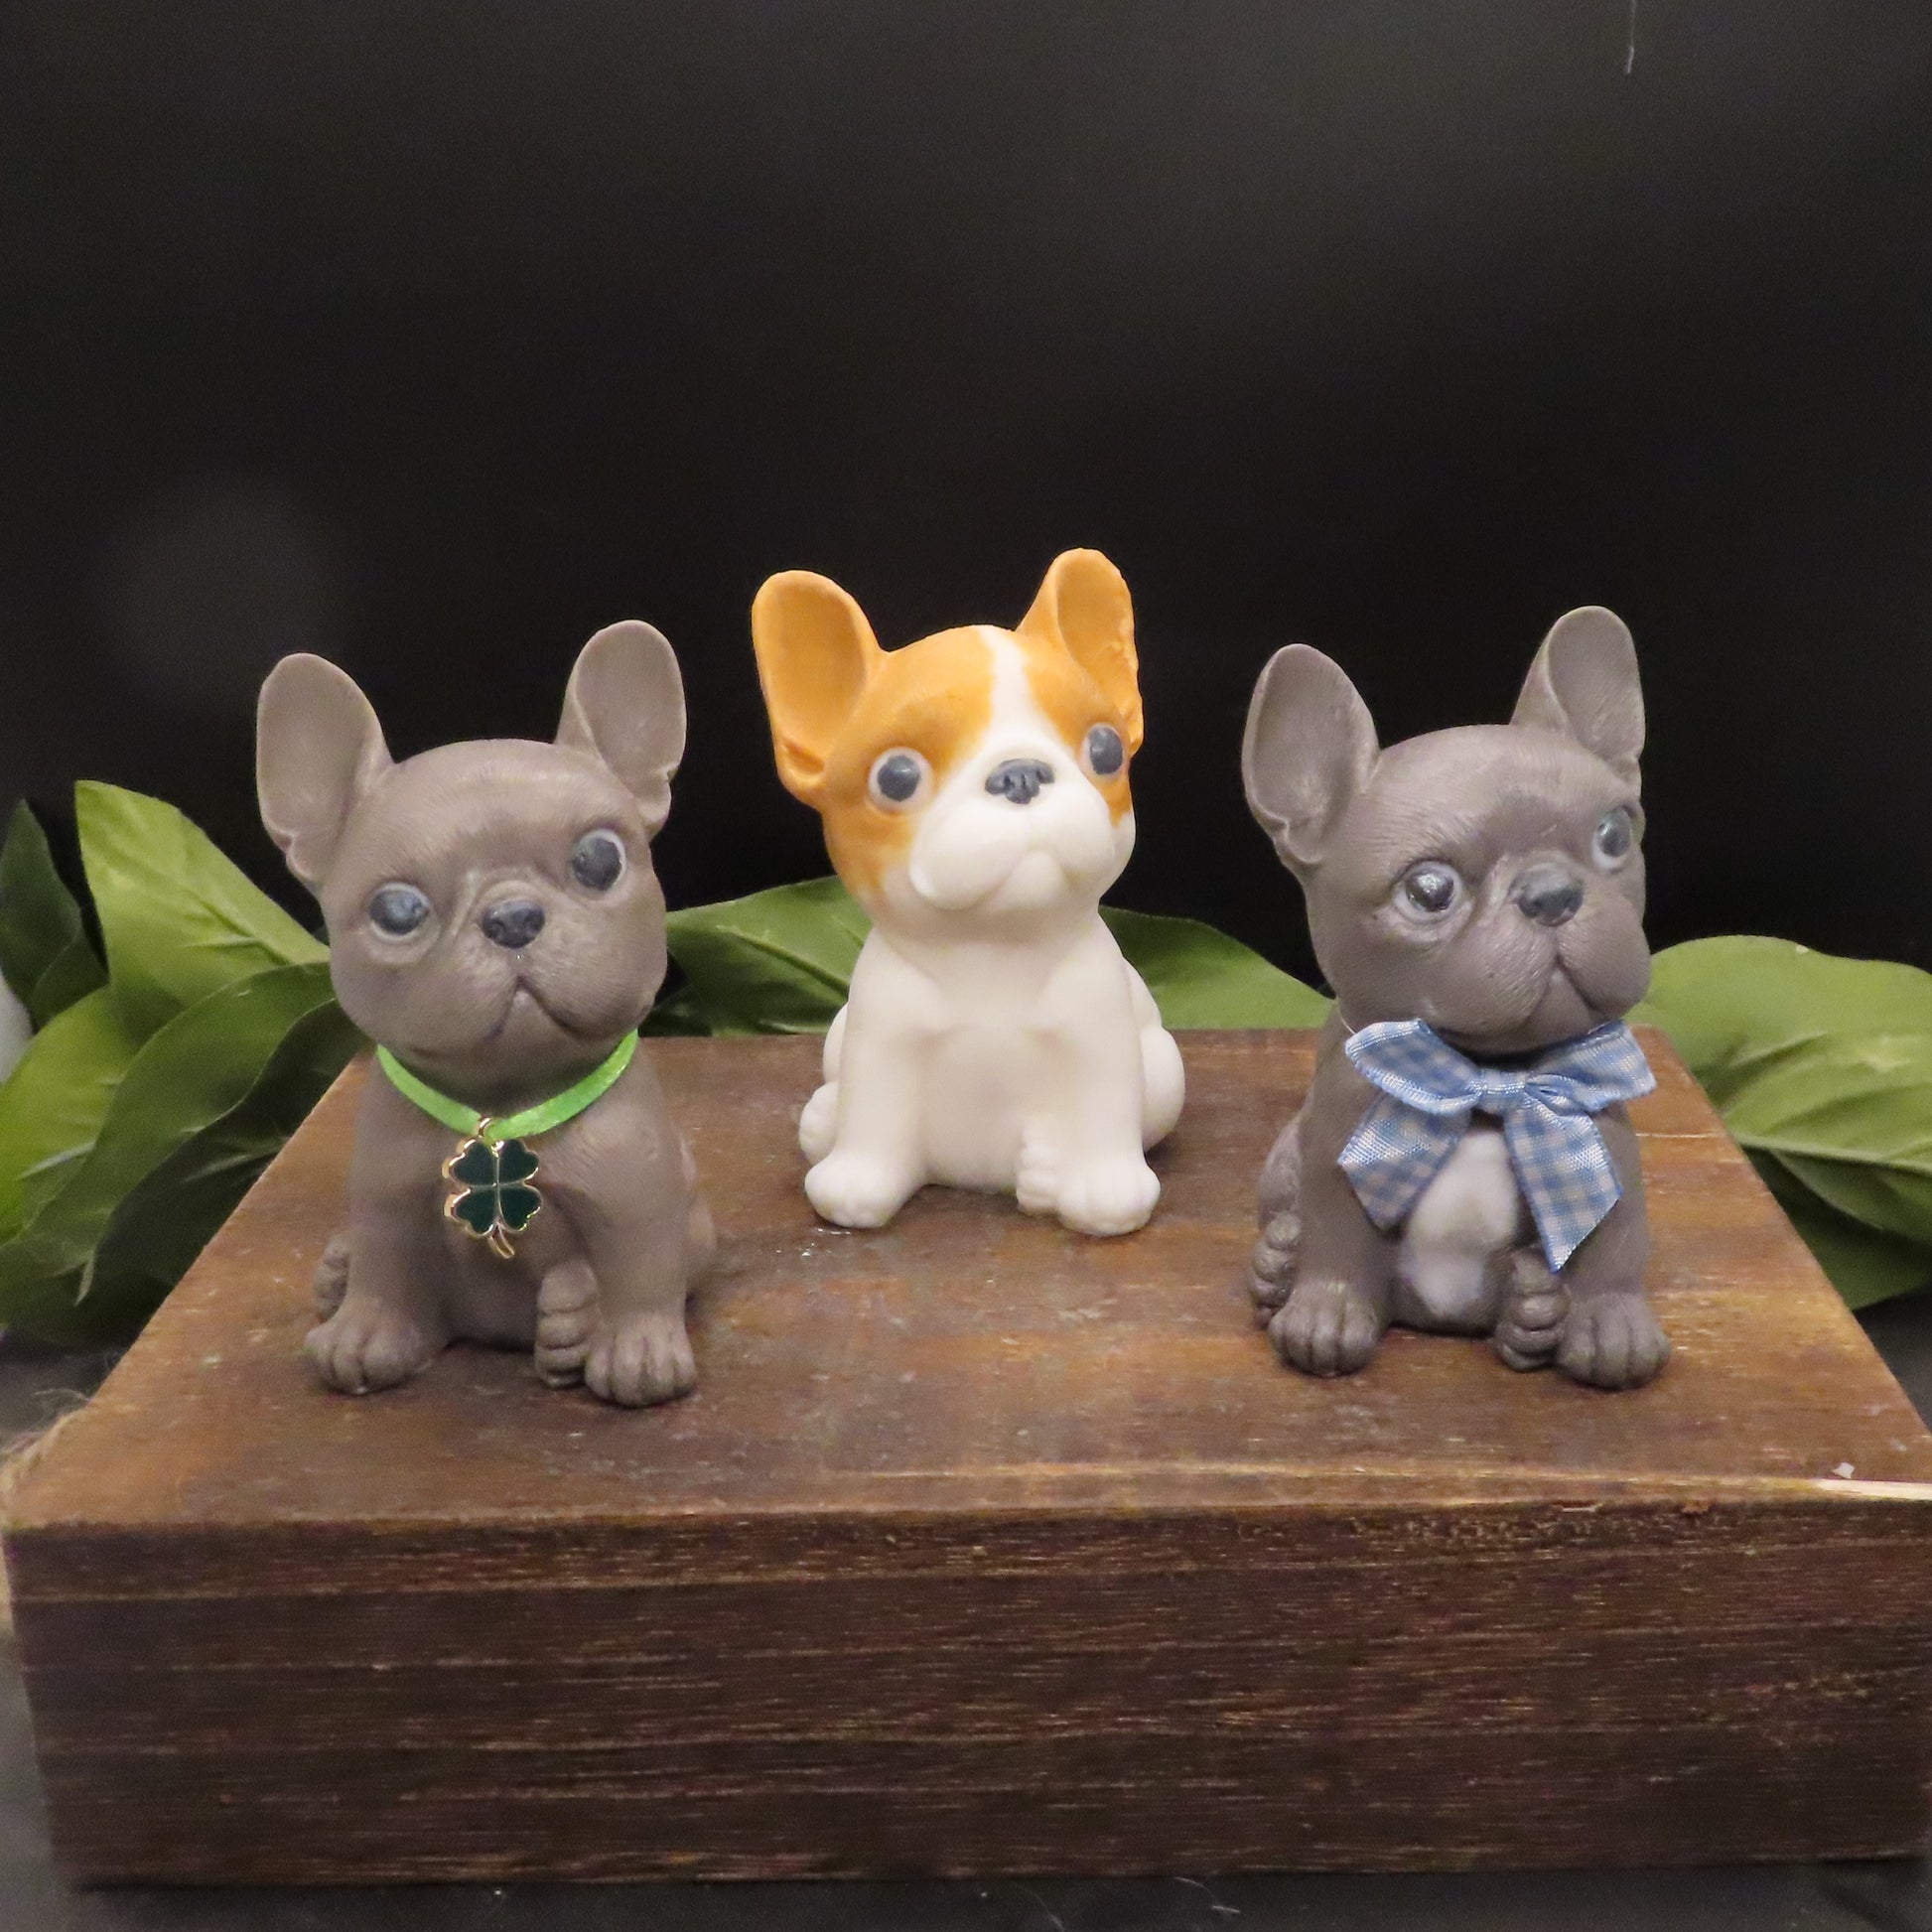 2 French bulldogs in various colors.  Makes a great gift